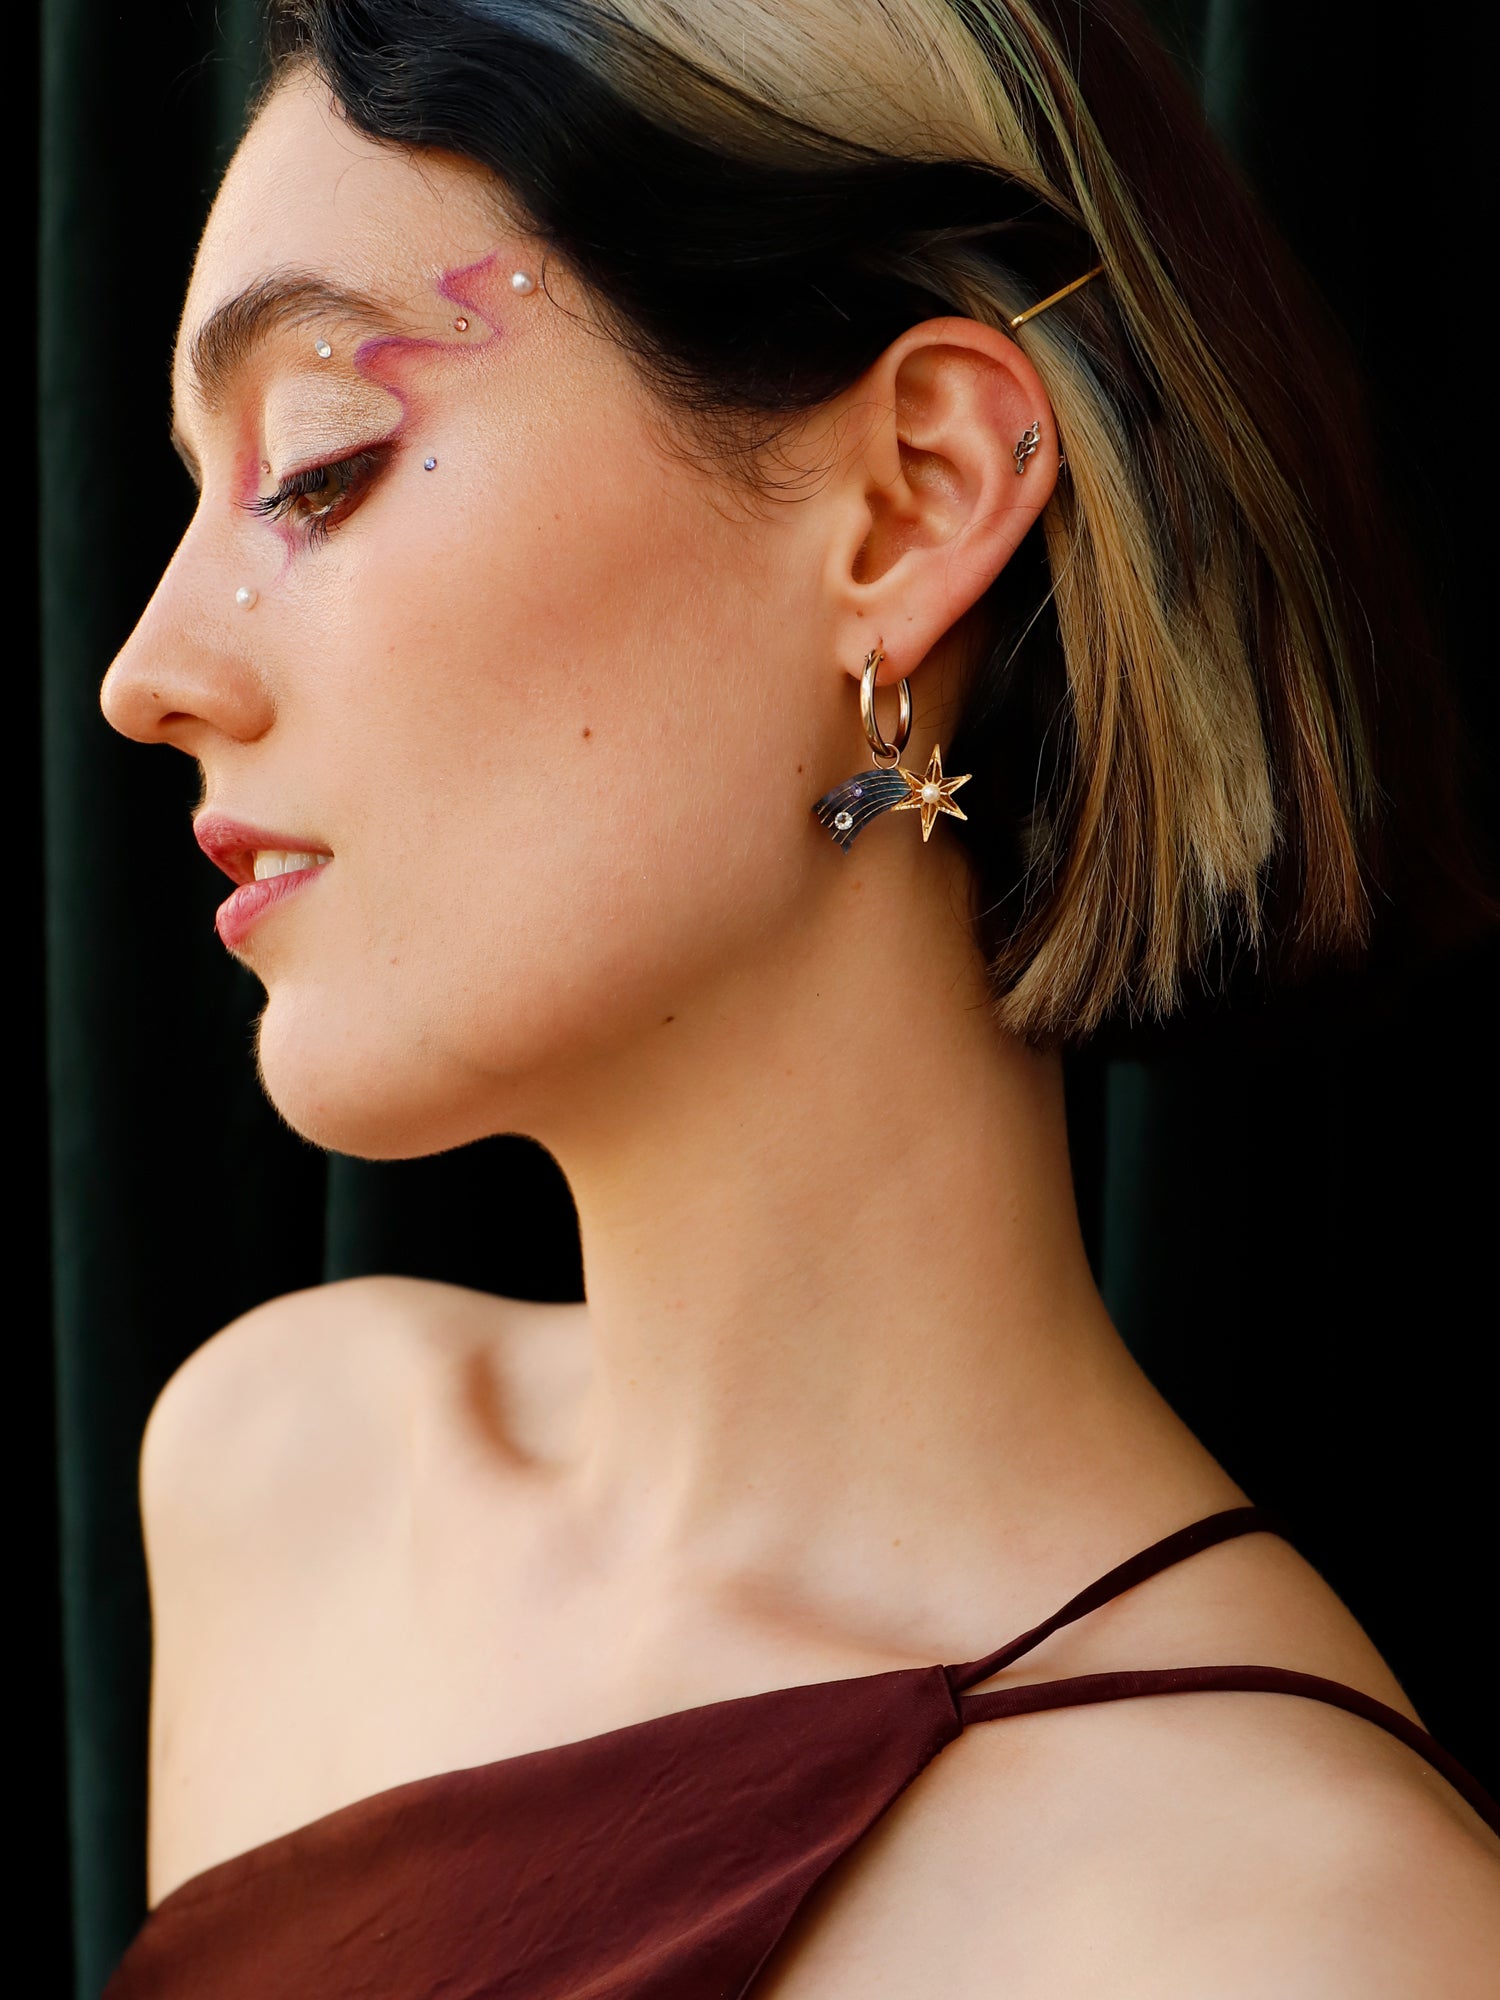 Shooting Star & Saturn Hoops. Charm earrings made with laser cut acrylic, Czech glass pearls and hand inked details. Handmade in the UK by Wolf & Moon.